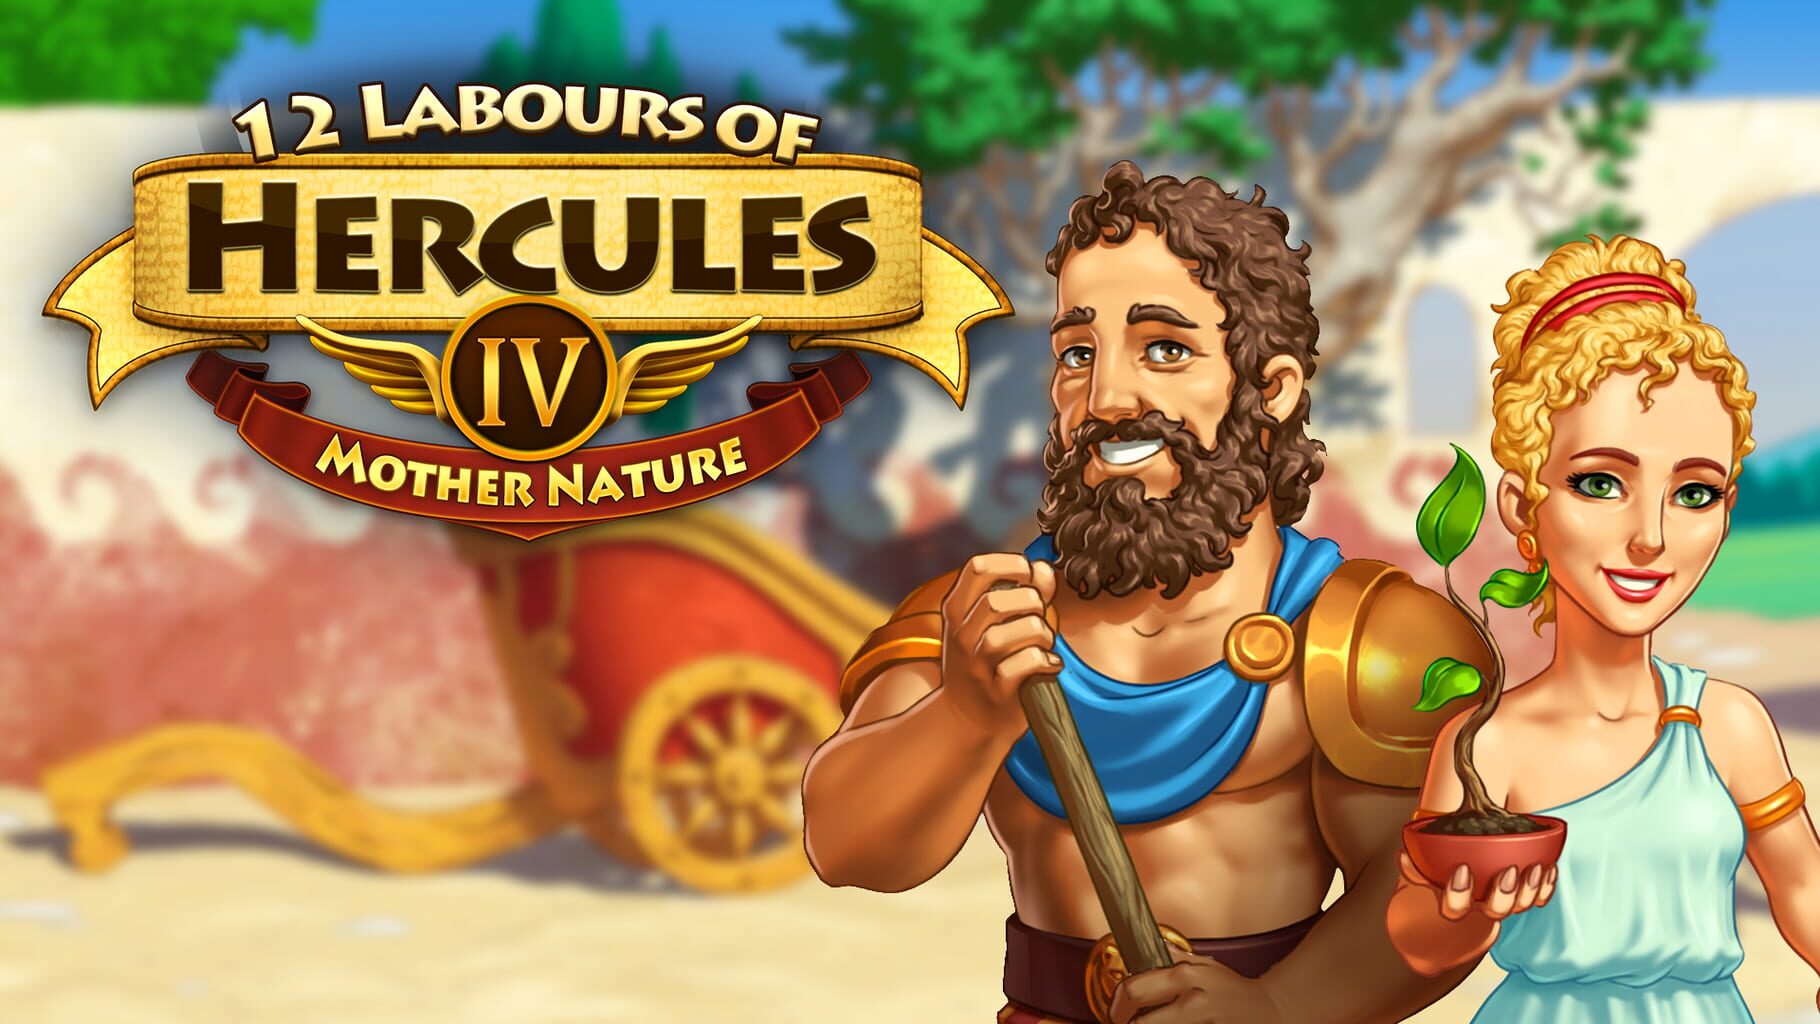 12 Labours of Hercules IV: Mother Nature artwork